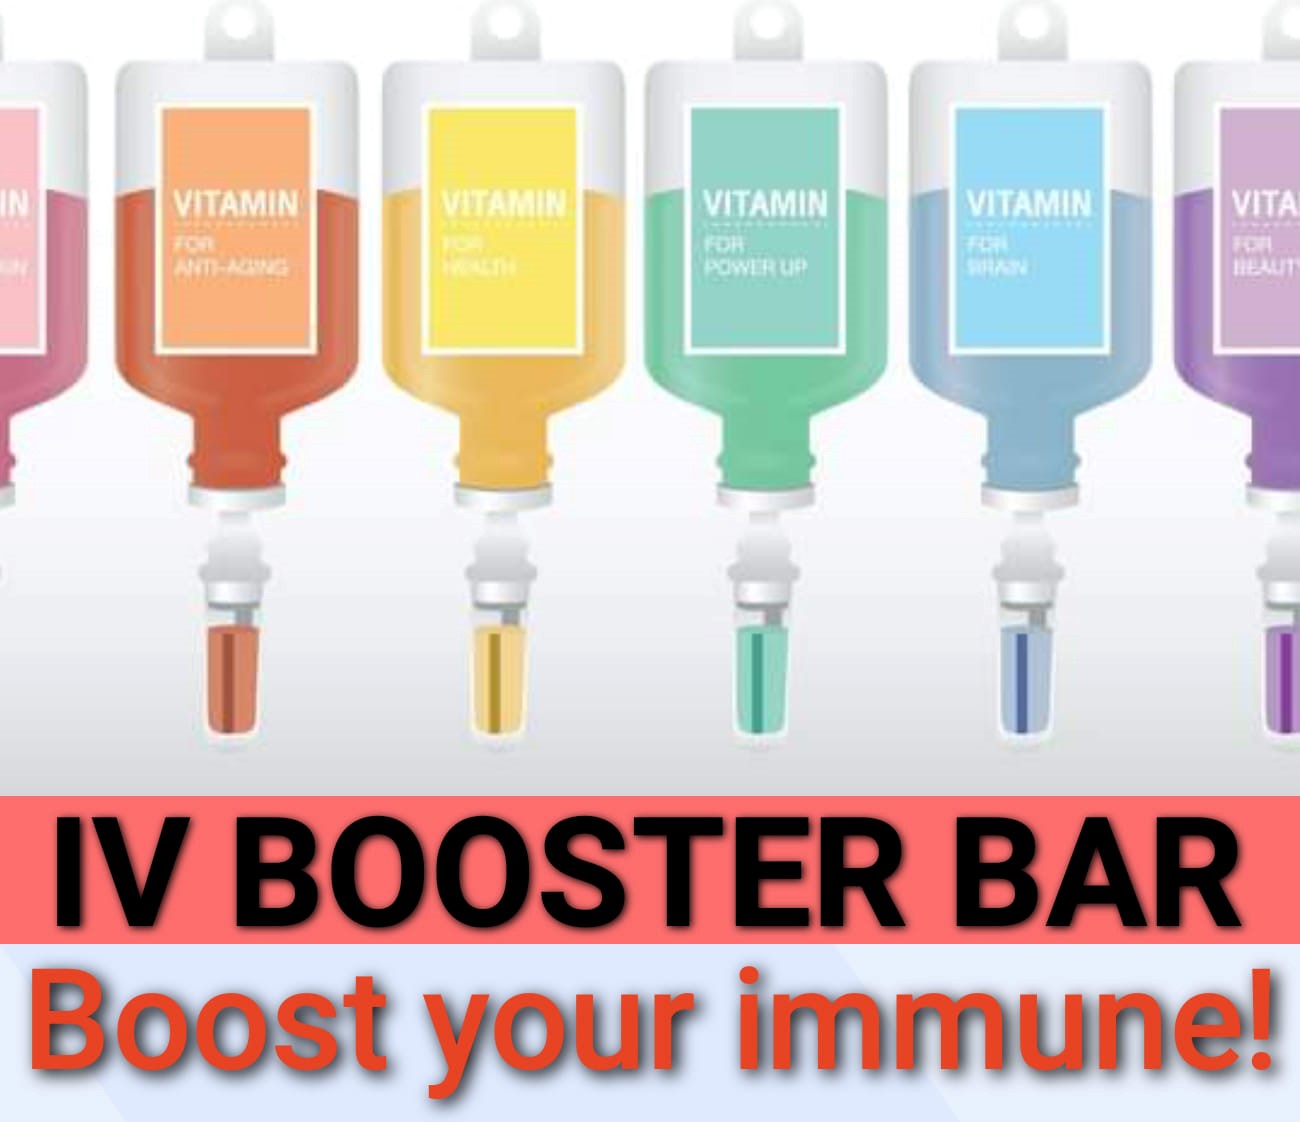 IV Booster Bar and Medical Centre 6